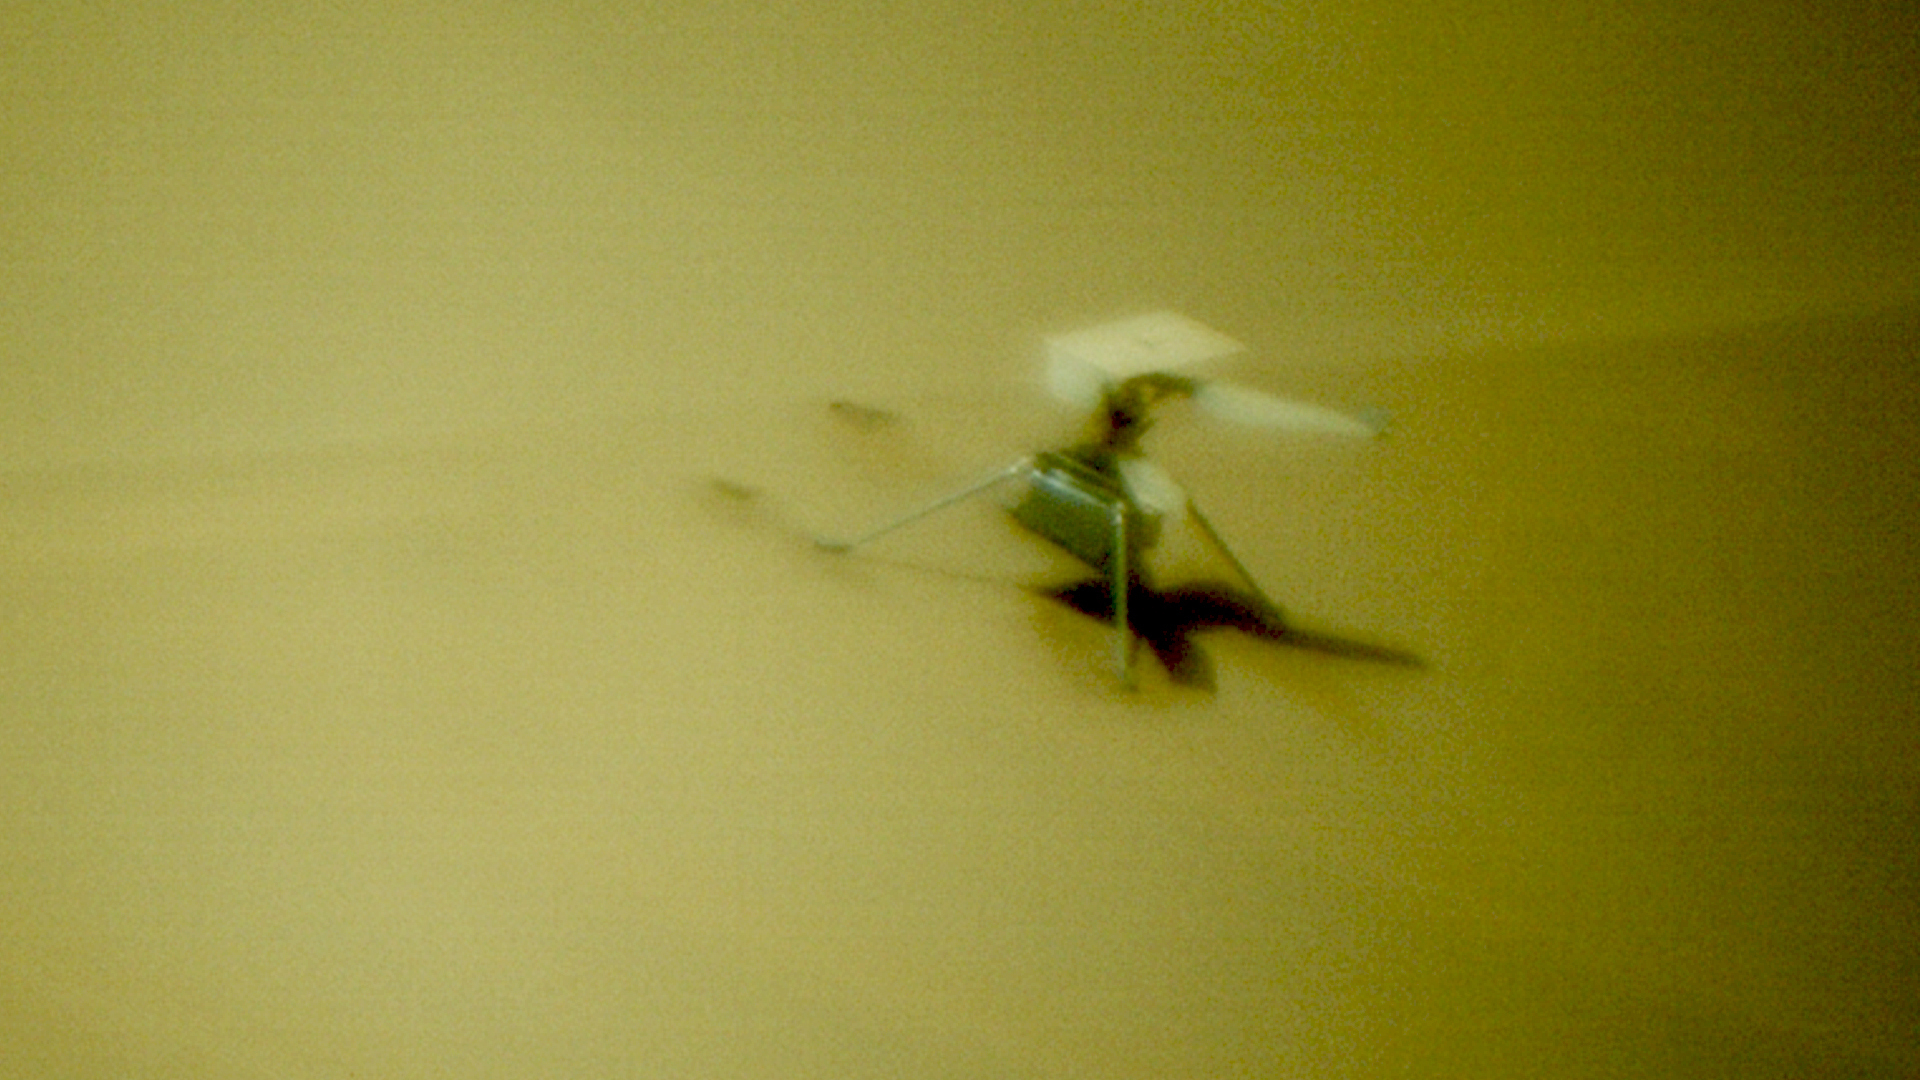 close-up view of a small, boxy drone resting on a sand dune.